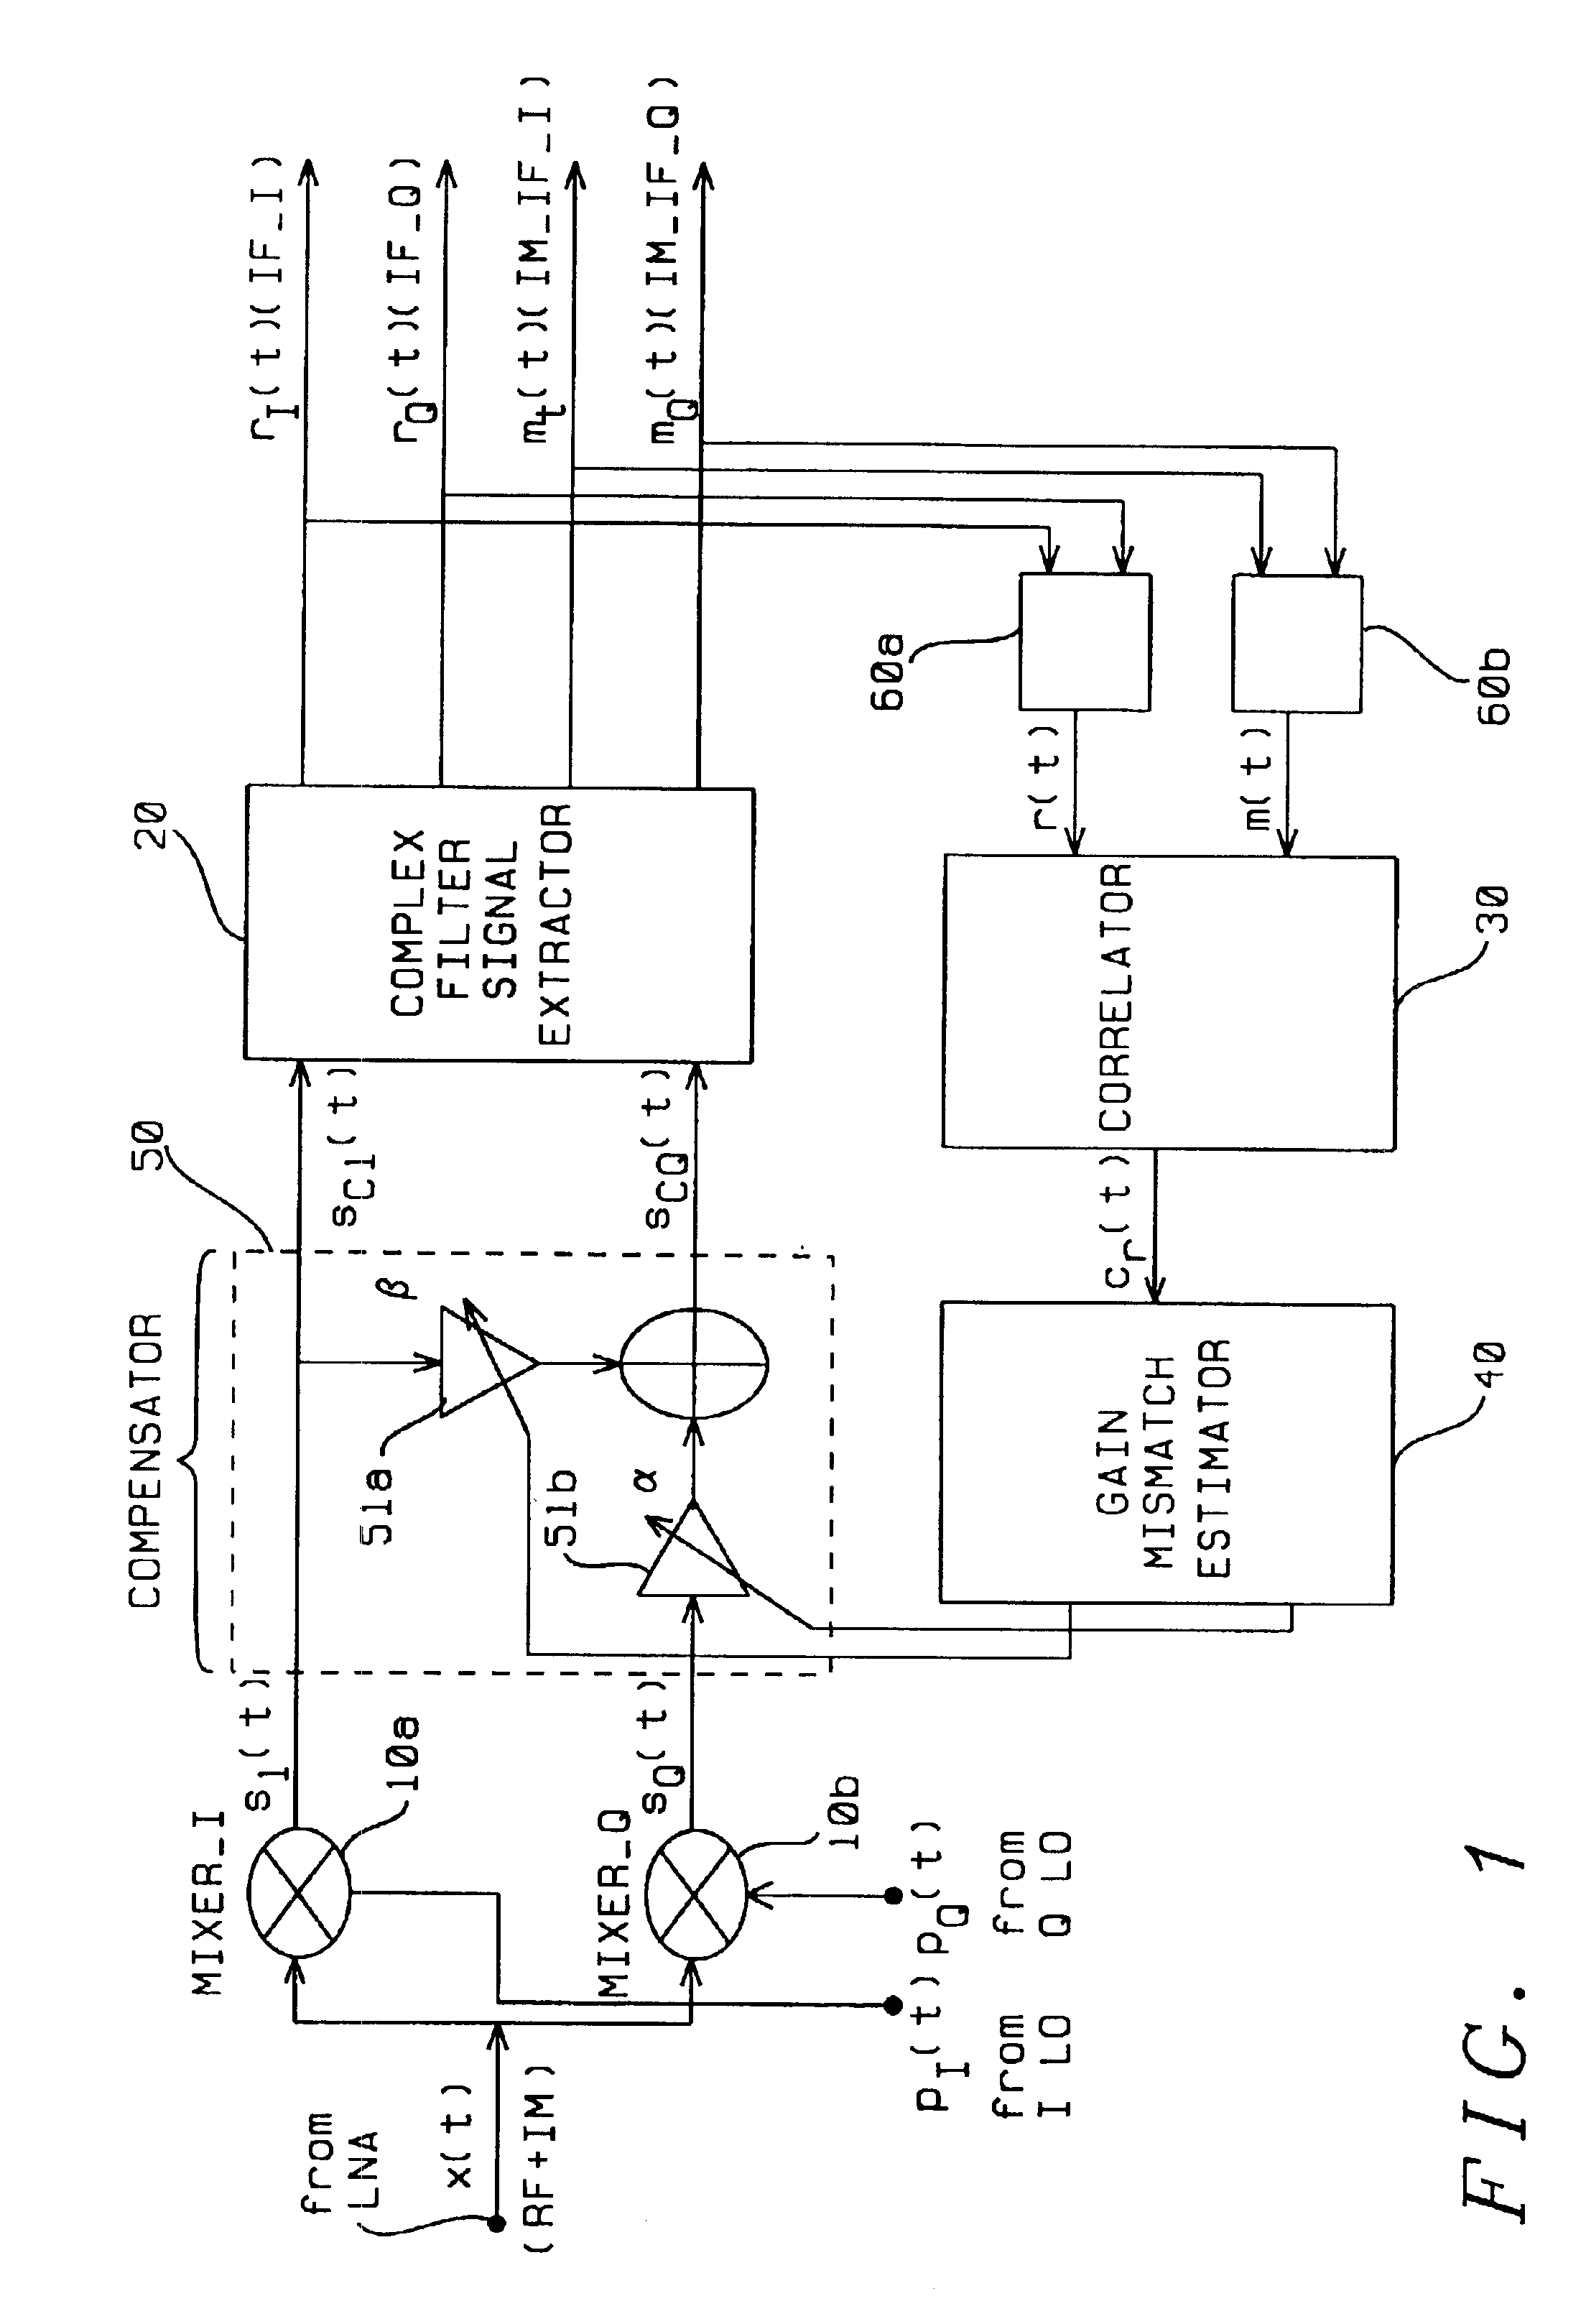 Fully integrated self-tuned image rejection downconversion system